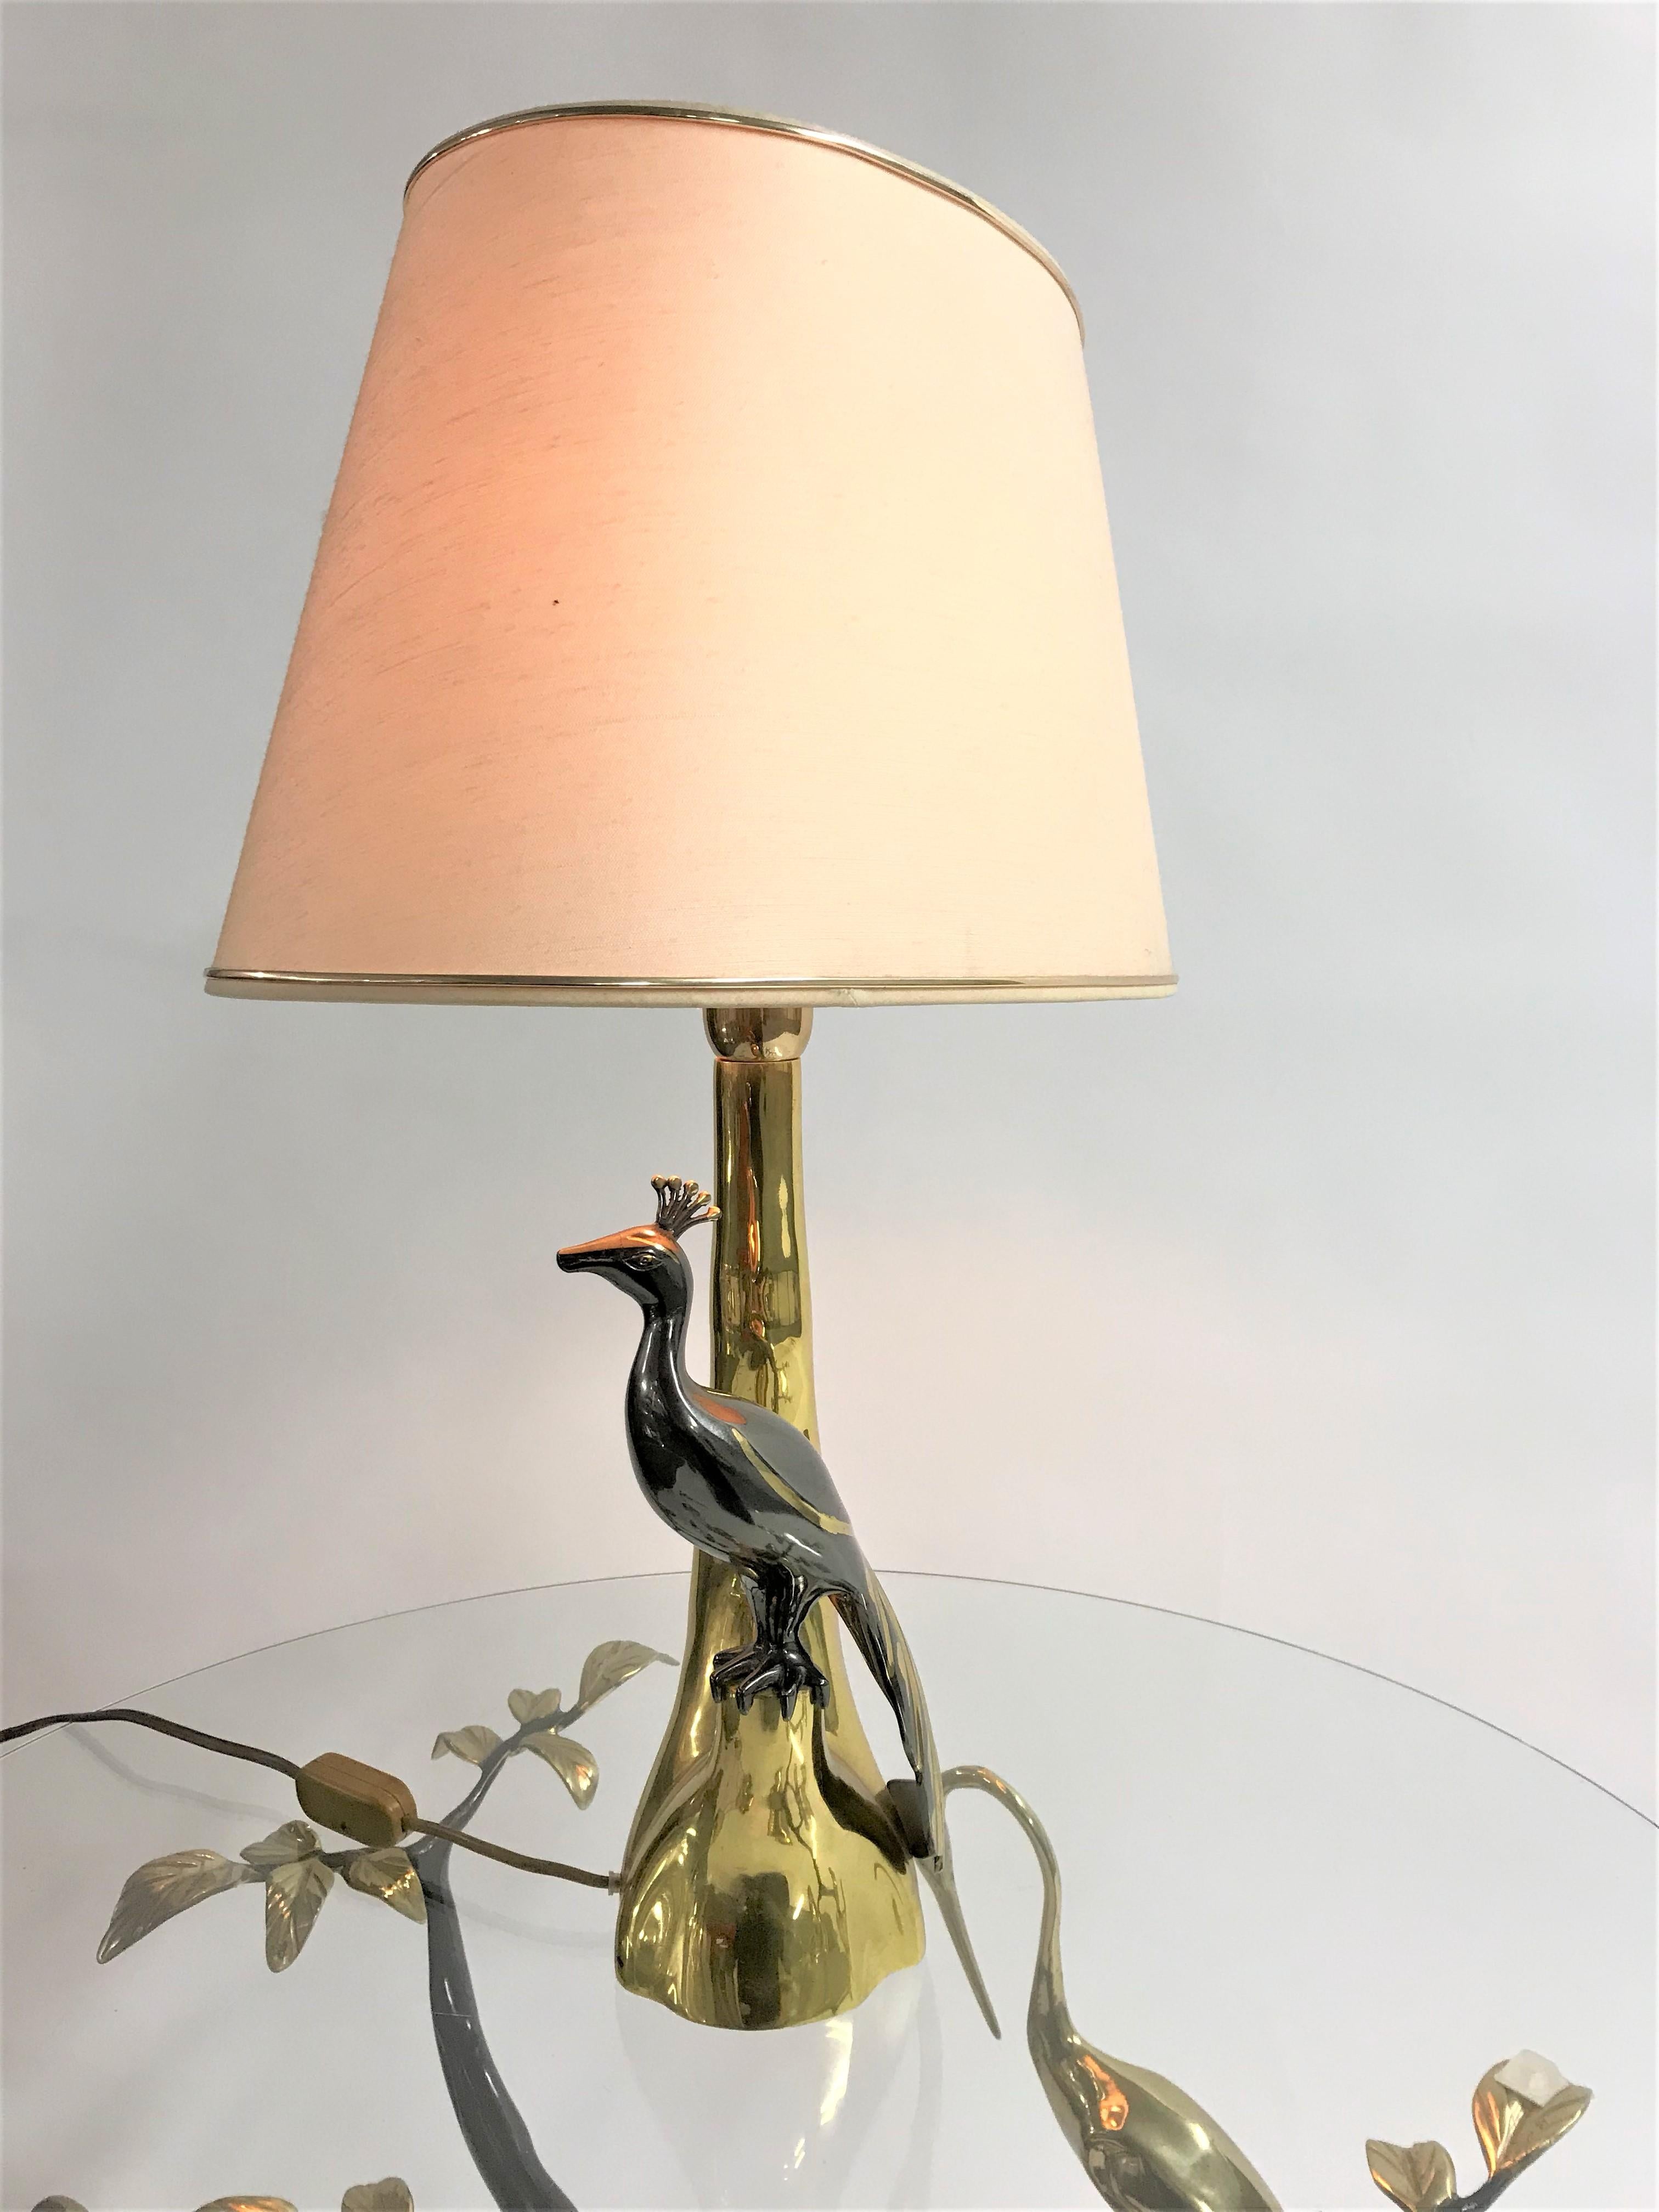 Vintage brass table lamp depicting a peacock sitting on a branch.

The lamp was made by Willy Daro.

Good condition, tested and ready for use with a regular E26/E27 light bulb.

1970s, Belgium.

Dimensions:
Height 63cm/24.80